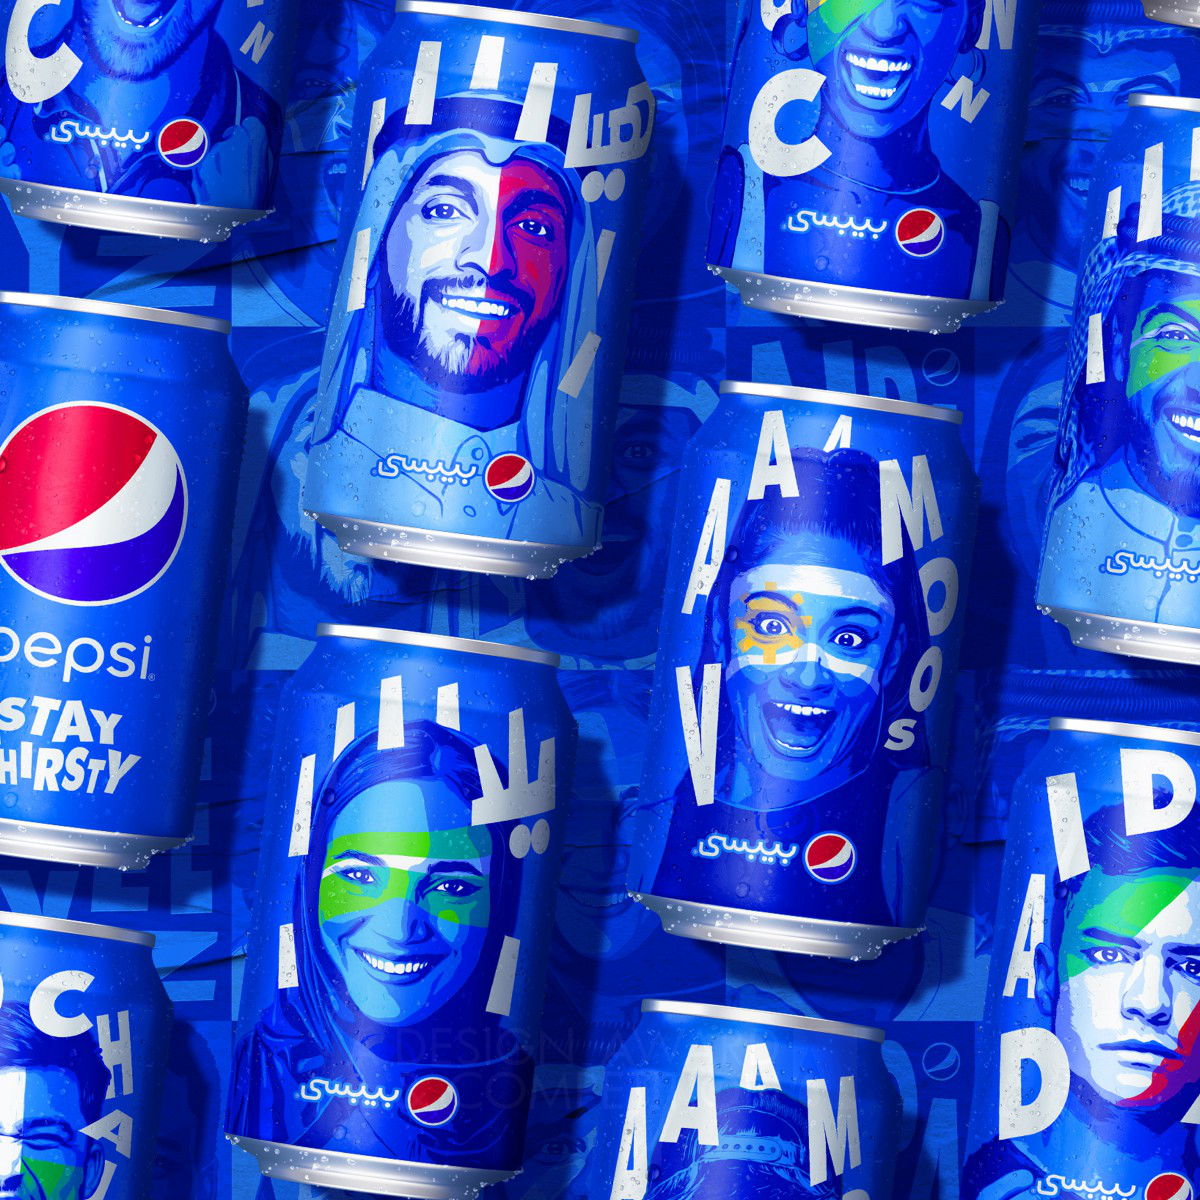 PepsiCo Design and Innovation wins Silver at the prestigious A' Packaging Design Award with Pepsi Big Football Event LTO Beverage Packaging .